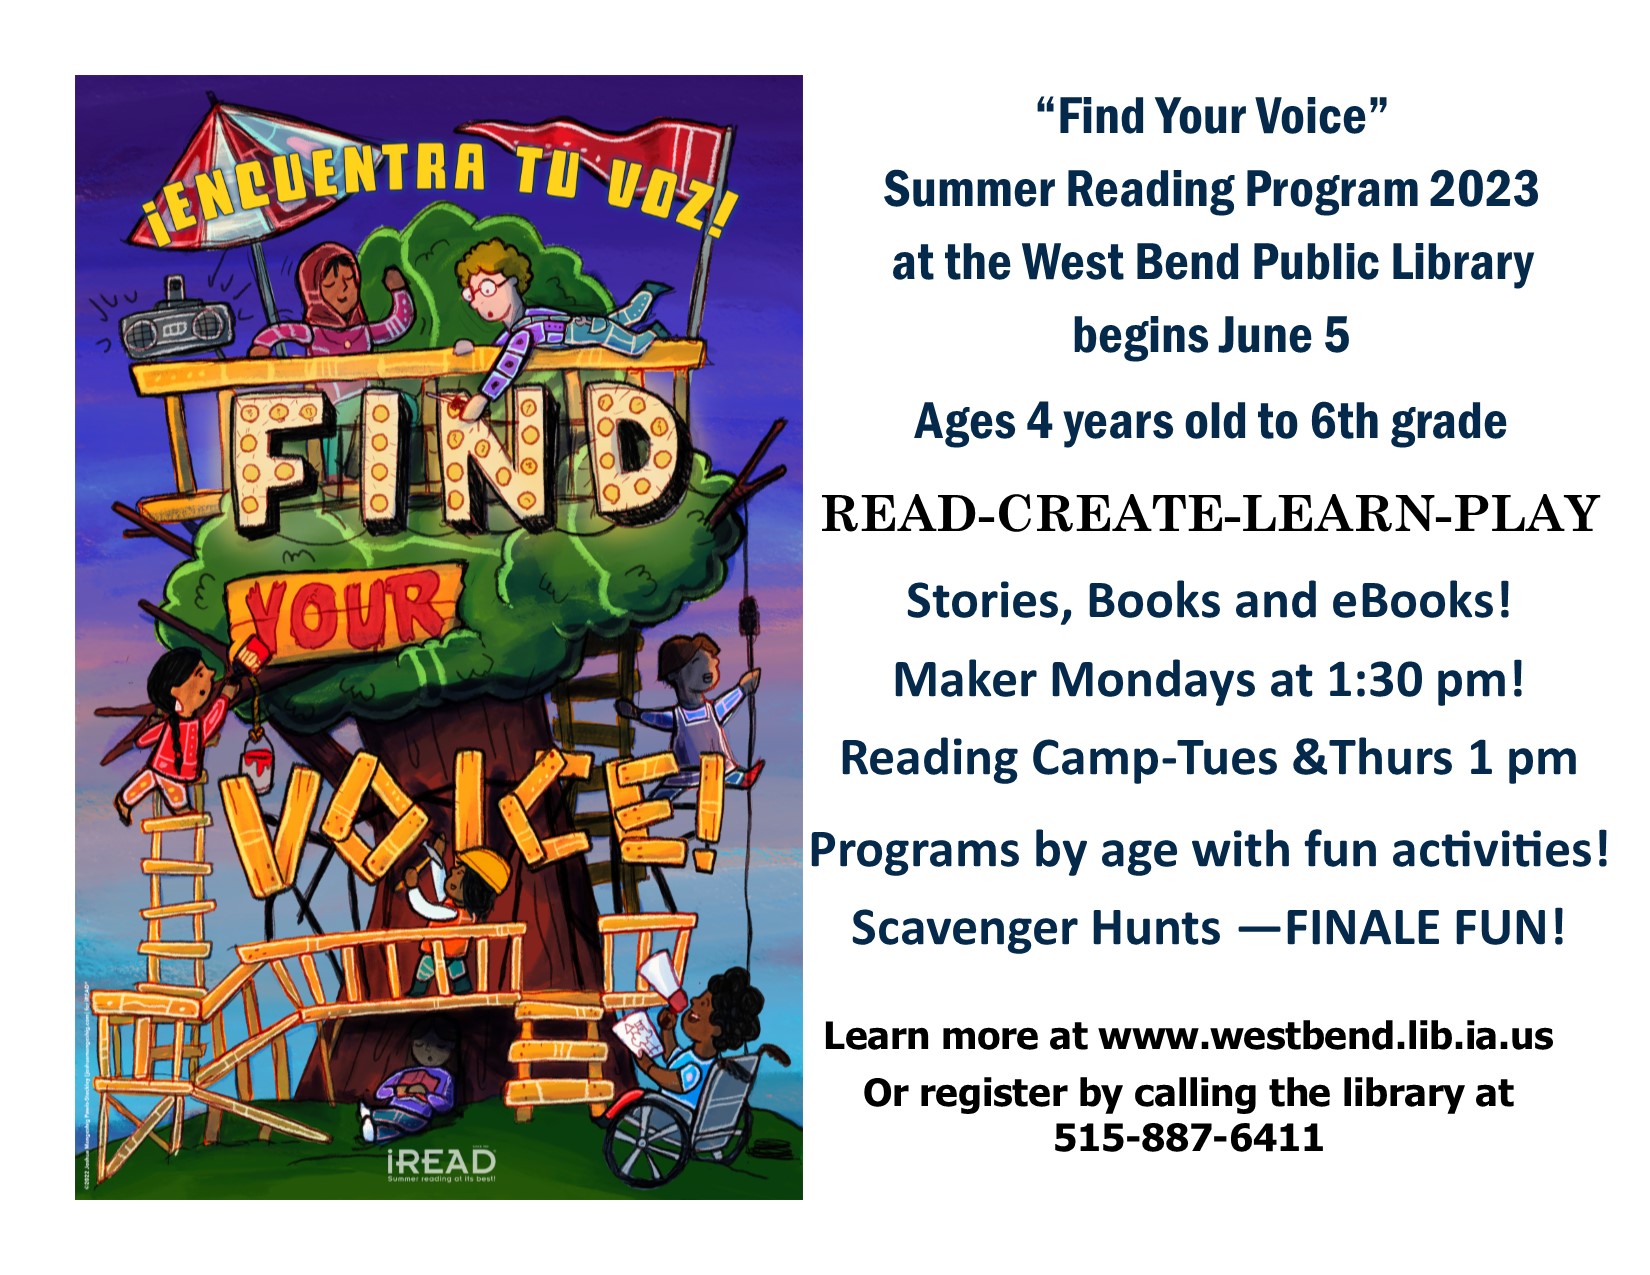 Find Your Voice Summer Reading Program